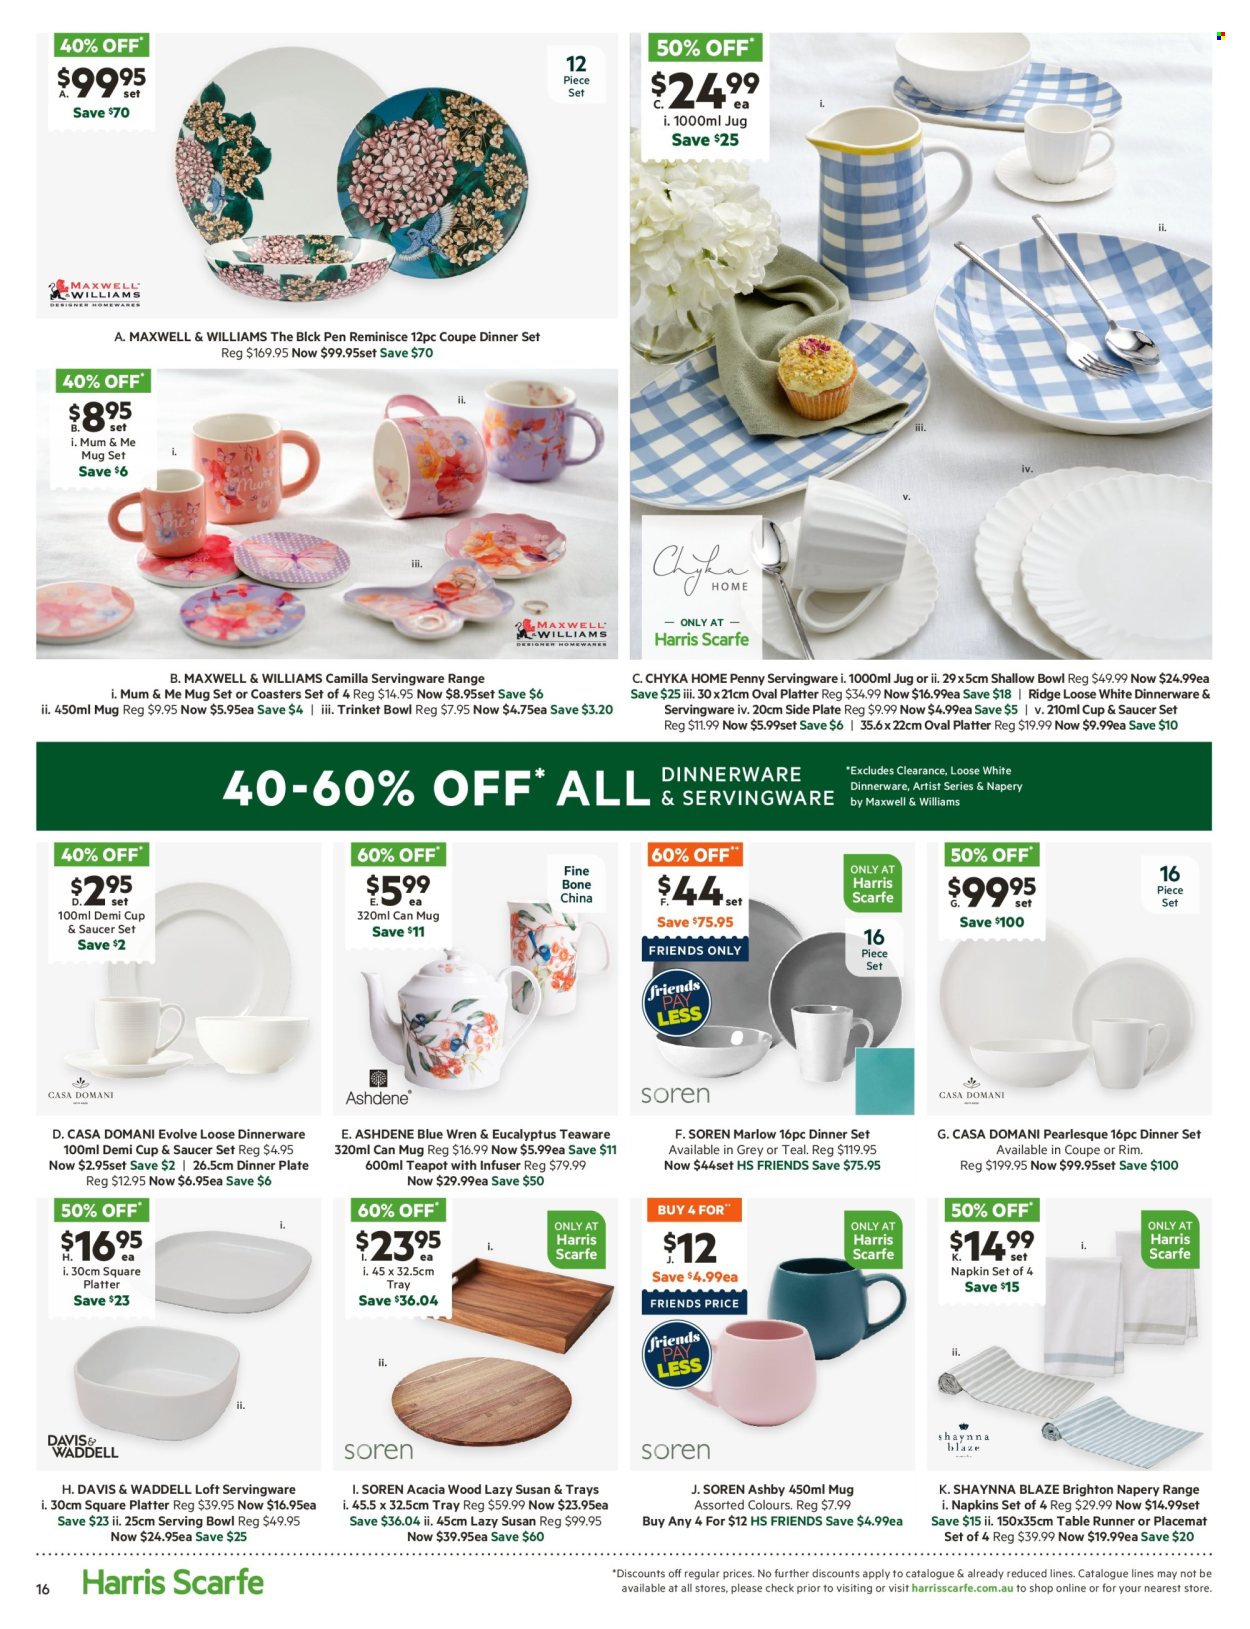 thumbnail - Harris Scarfe Catalogue - Sales products - dinnerware set, mug, teapot, tray, plate, saucer, cup, dinner plate, serving bowl, bowl, platters, serving tray, coasters, pen, table runner, napkins, placemat. Page 16.